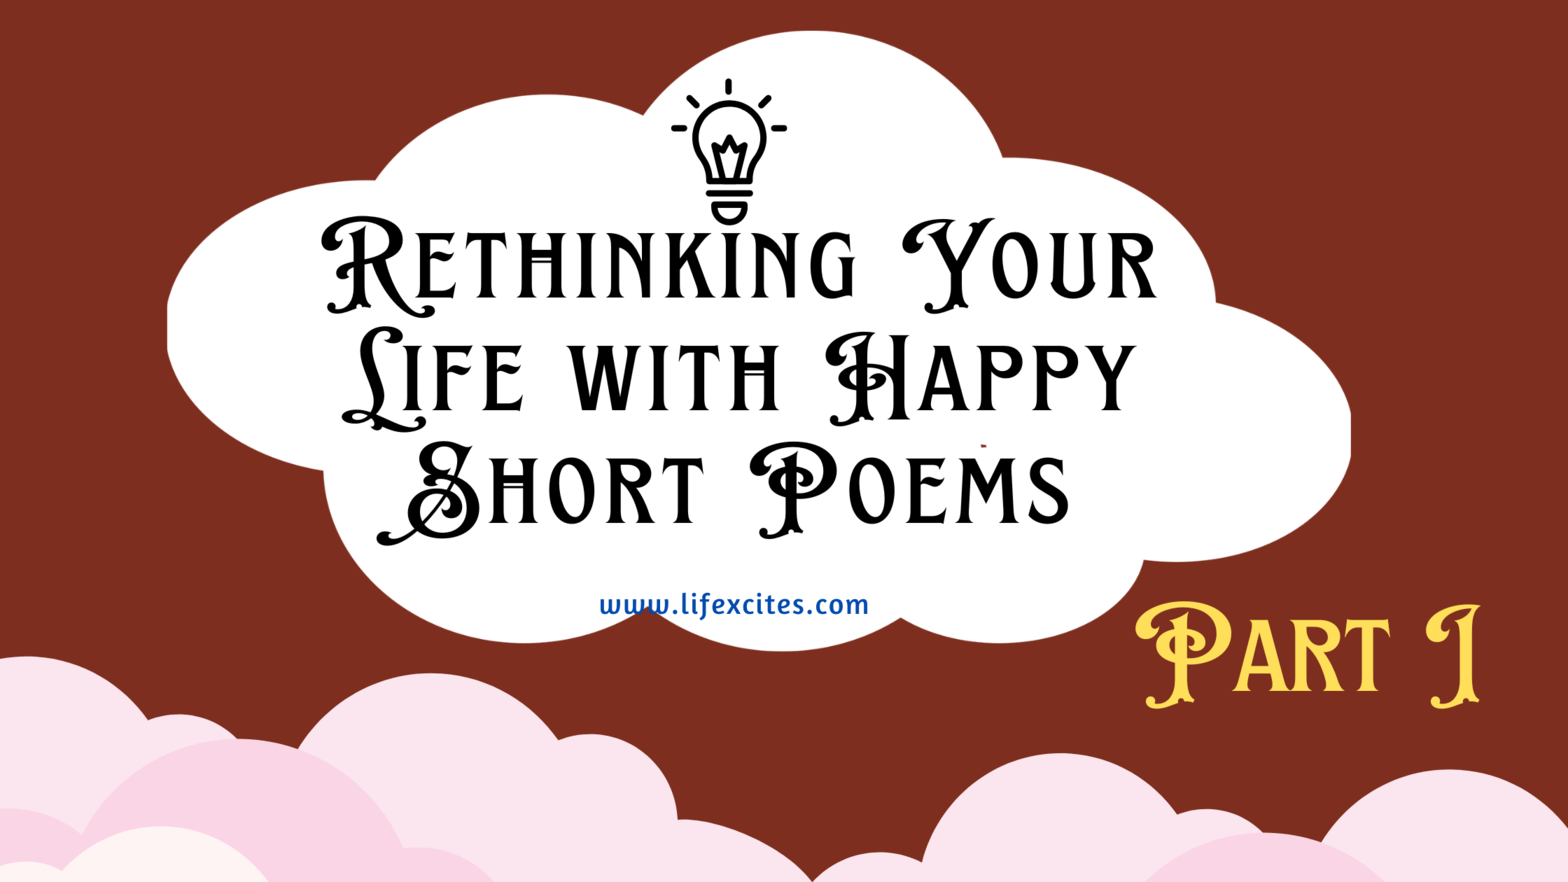 Rethinking-Your-Life-with-Happy-Short-Poems